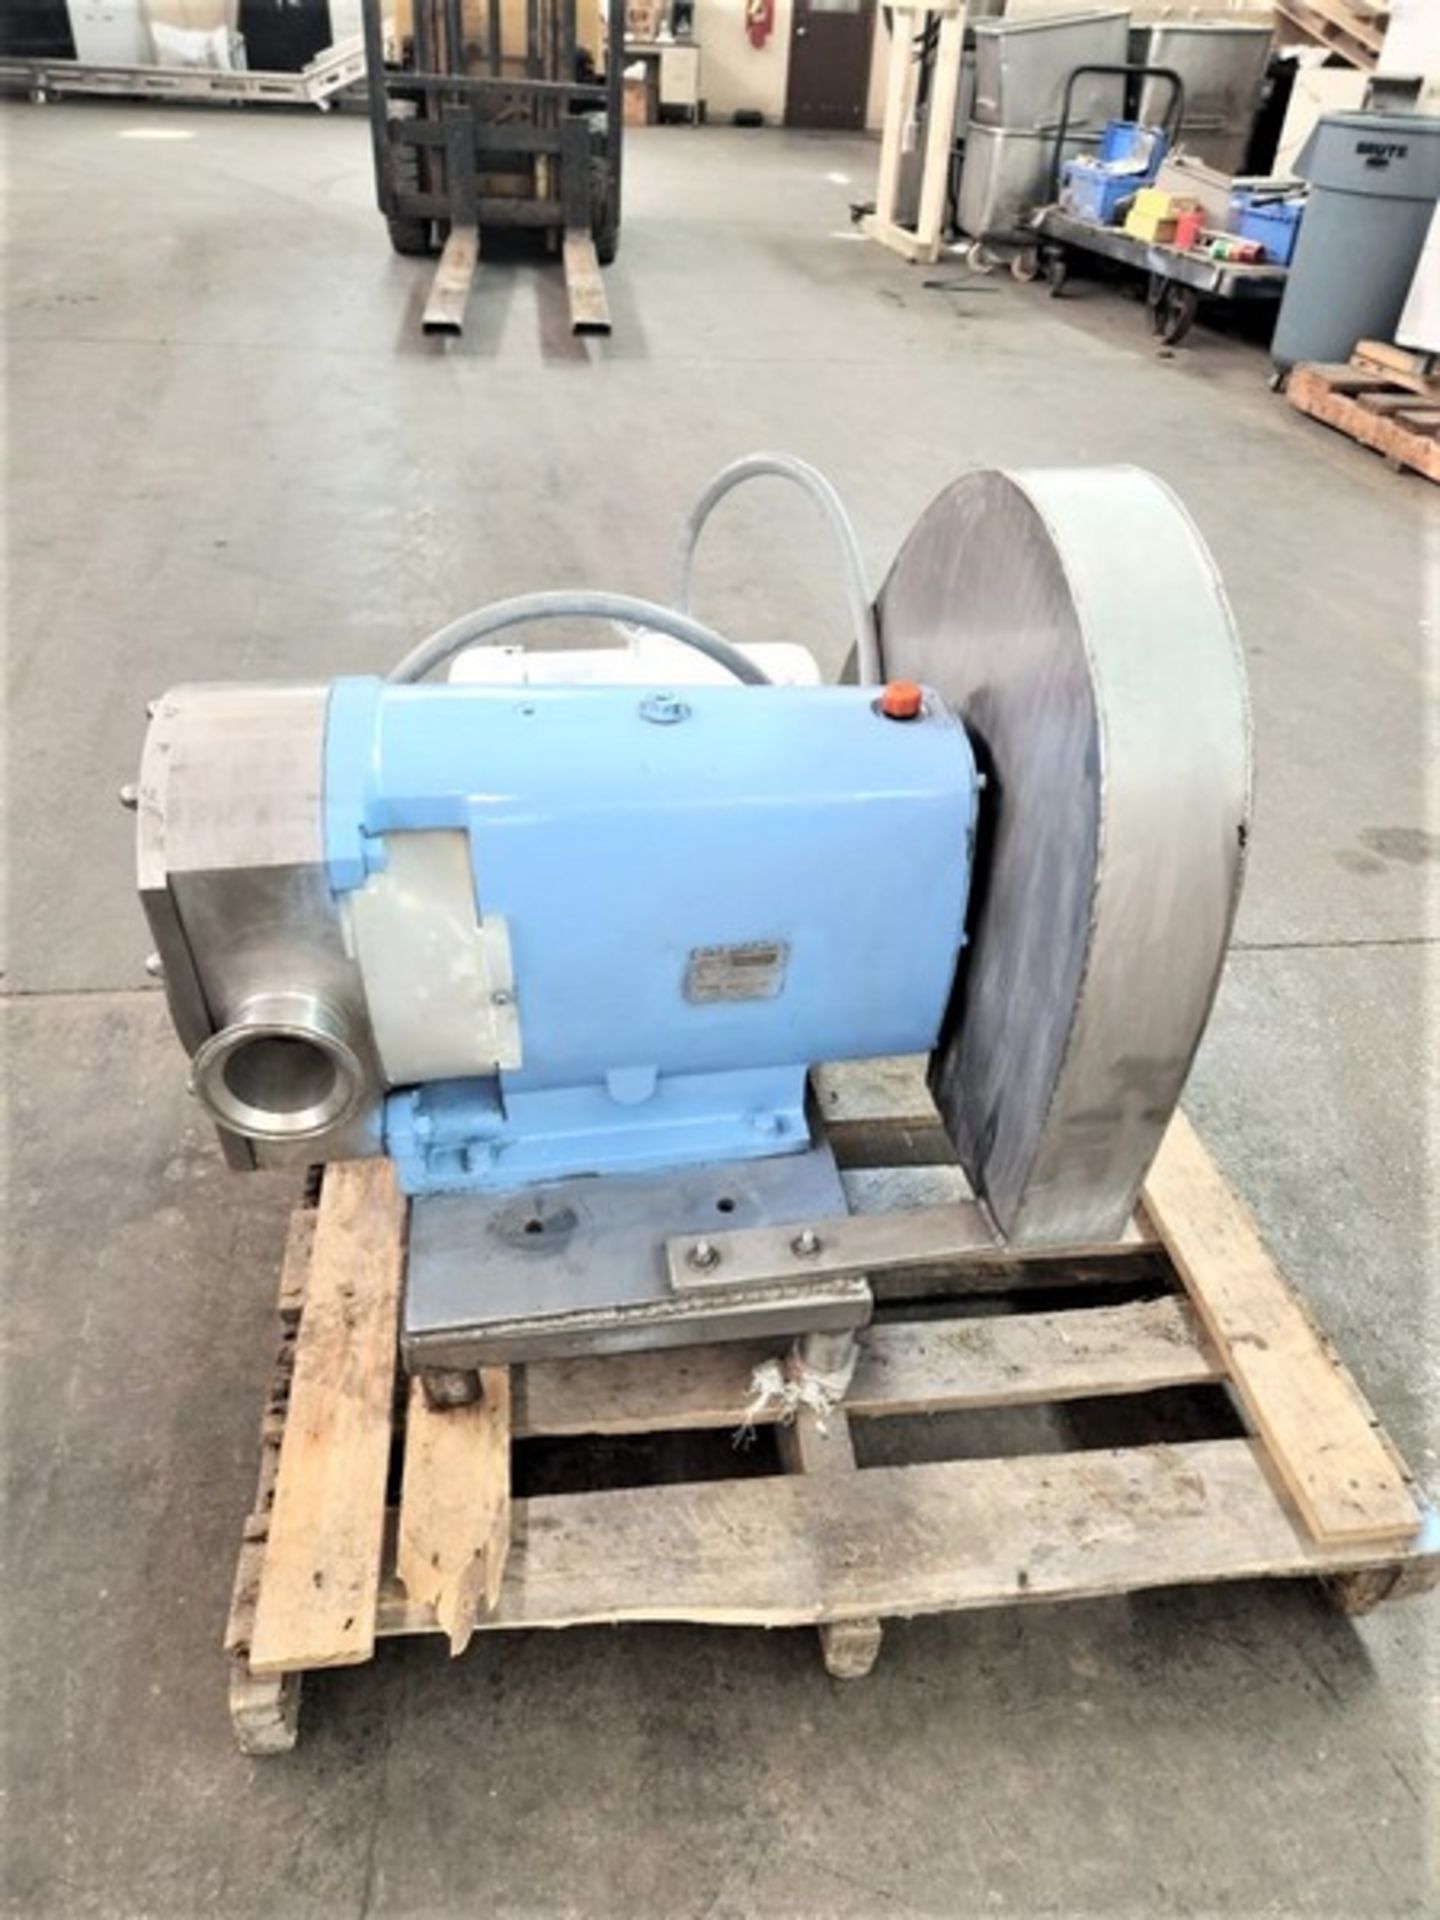 G H (Alfa Laval) 7.5 hp 4" S/S Sanitary Positive Displacement Pump, Model 822, S/N 95-8-50174 with - Image 4 of 15